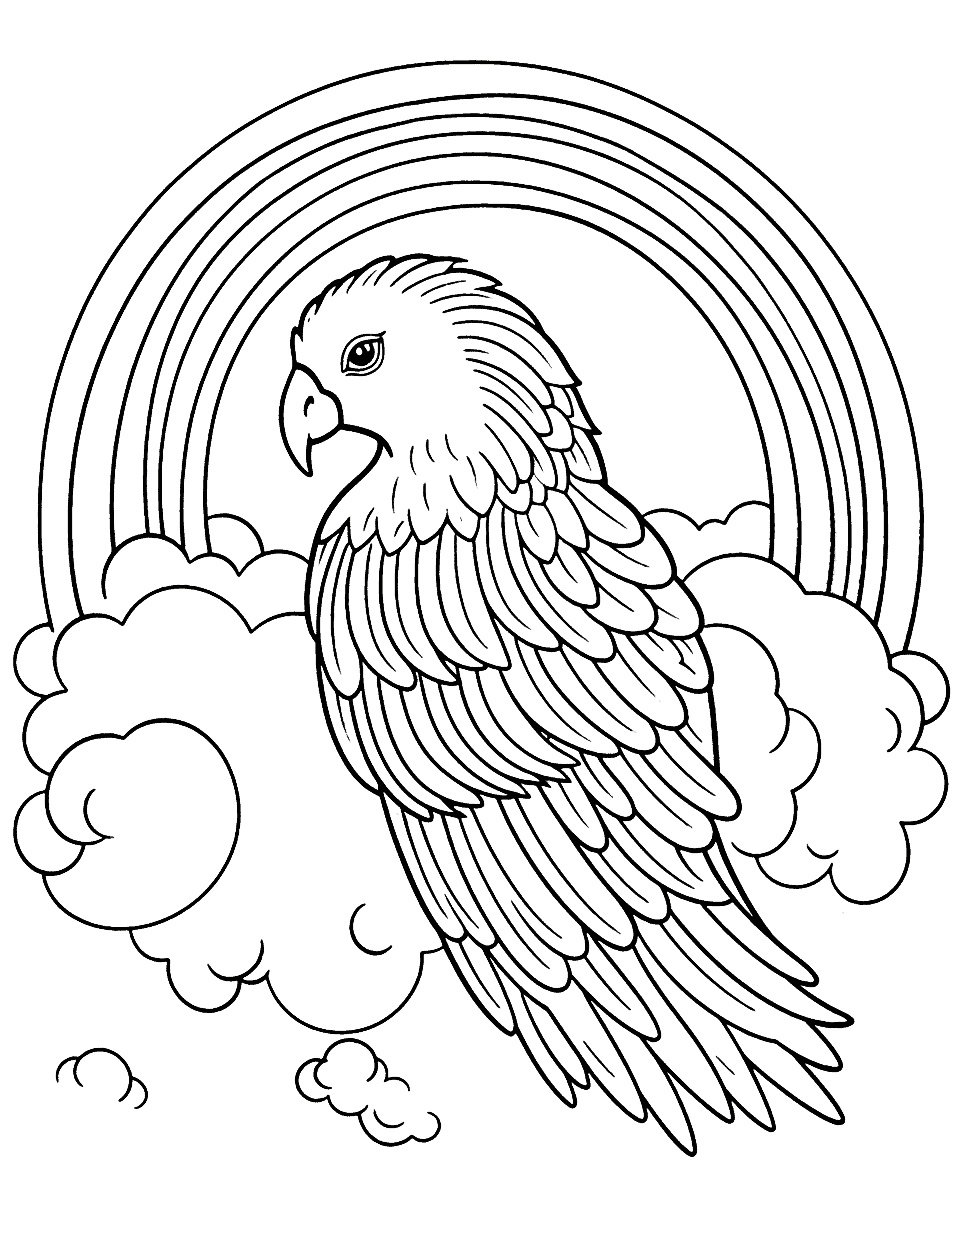 Rainbow Parrot Coloring Page - A detailed coloring page featuring a parrot with rainbow-colored feathers.